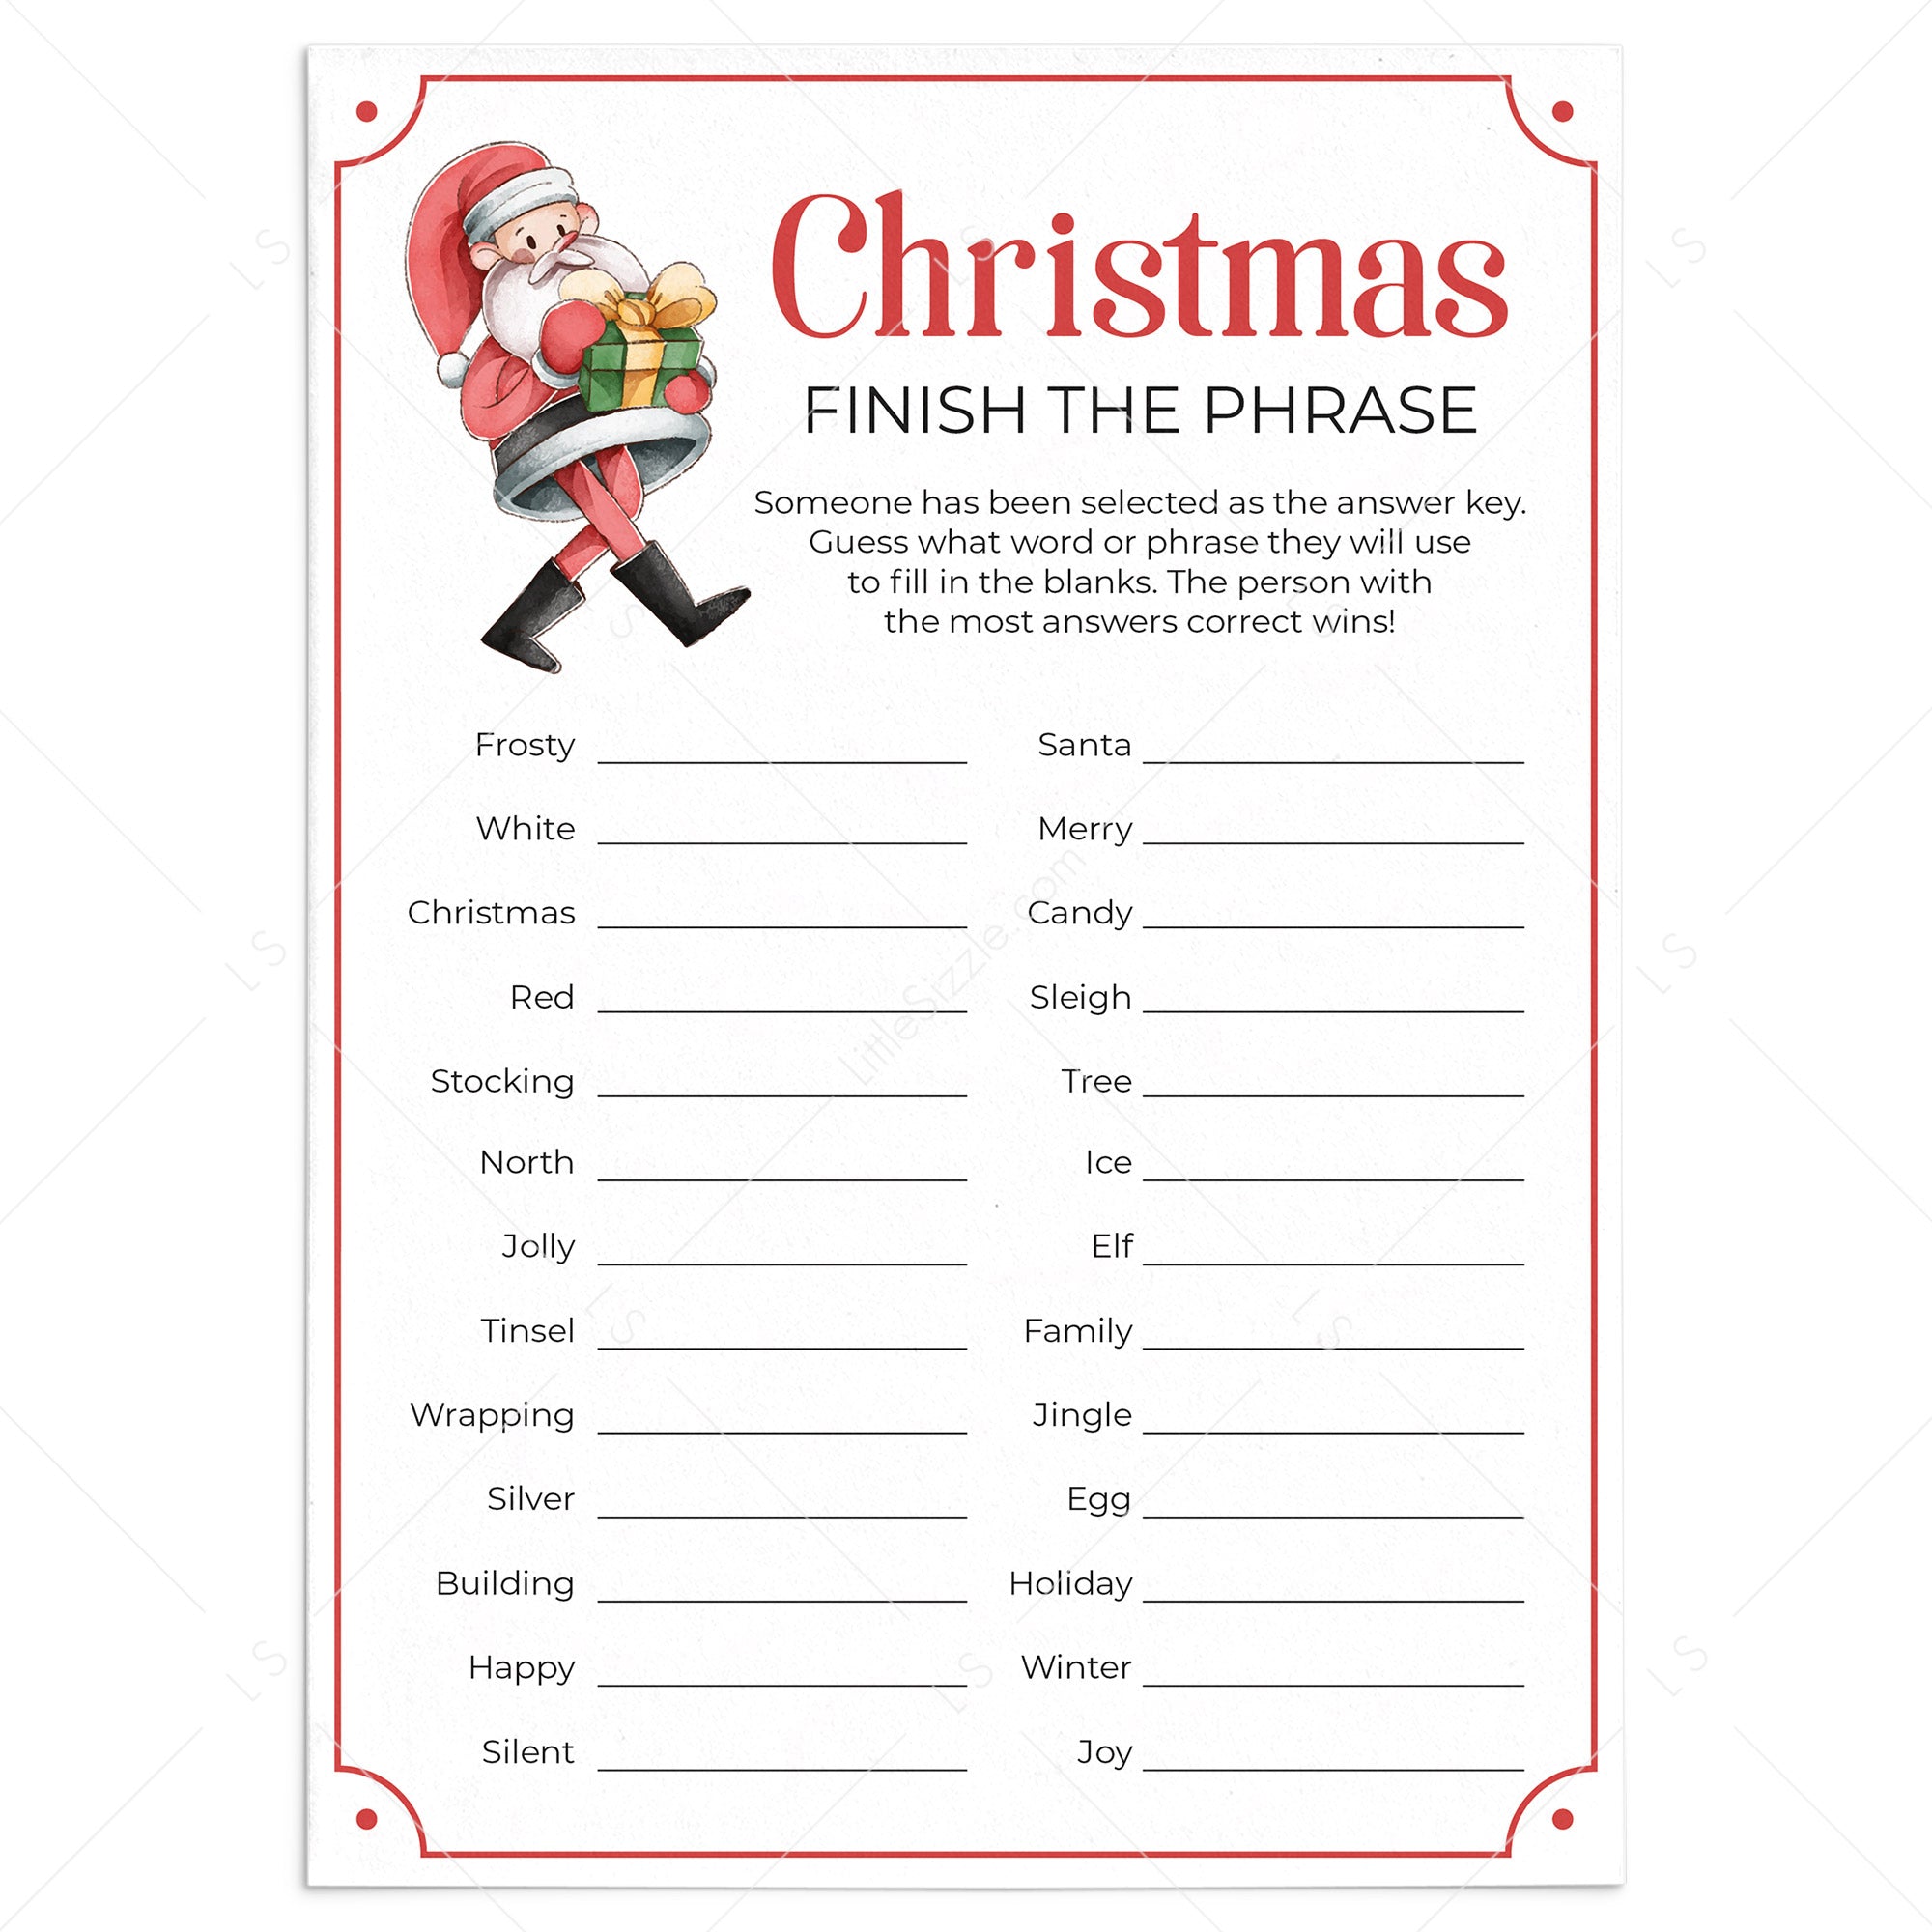 Printable Finish The Phrase Christmas Game by LittleSizzle